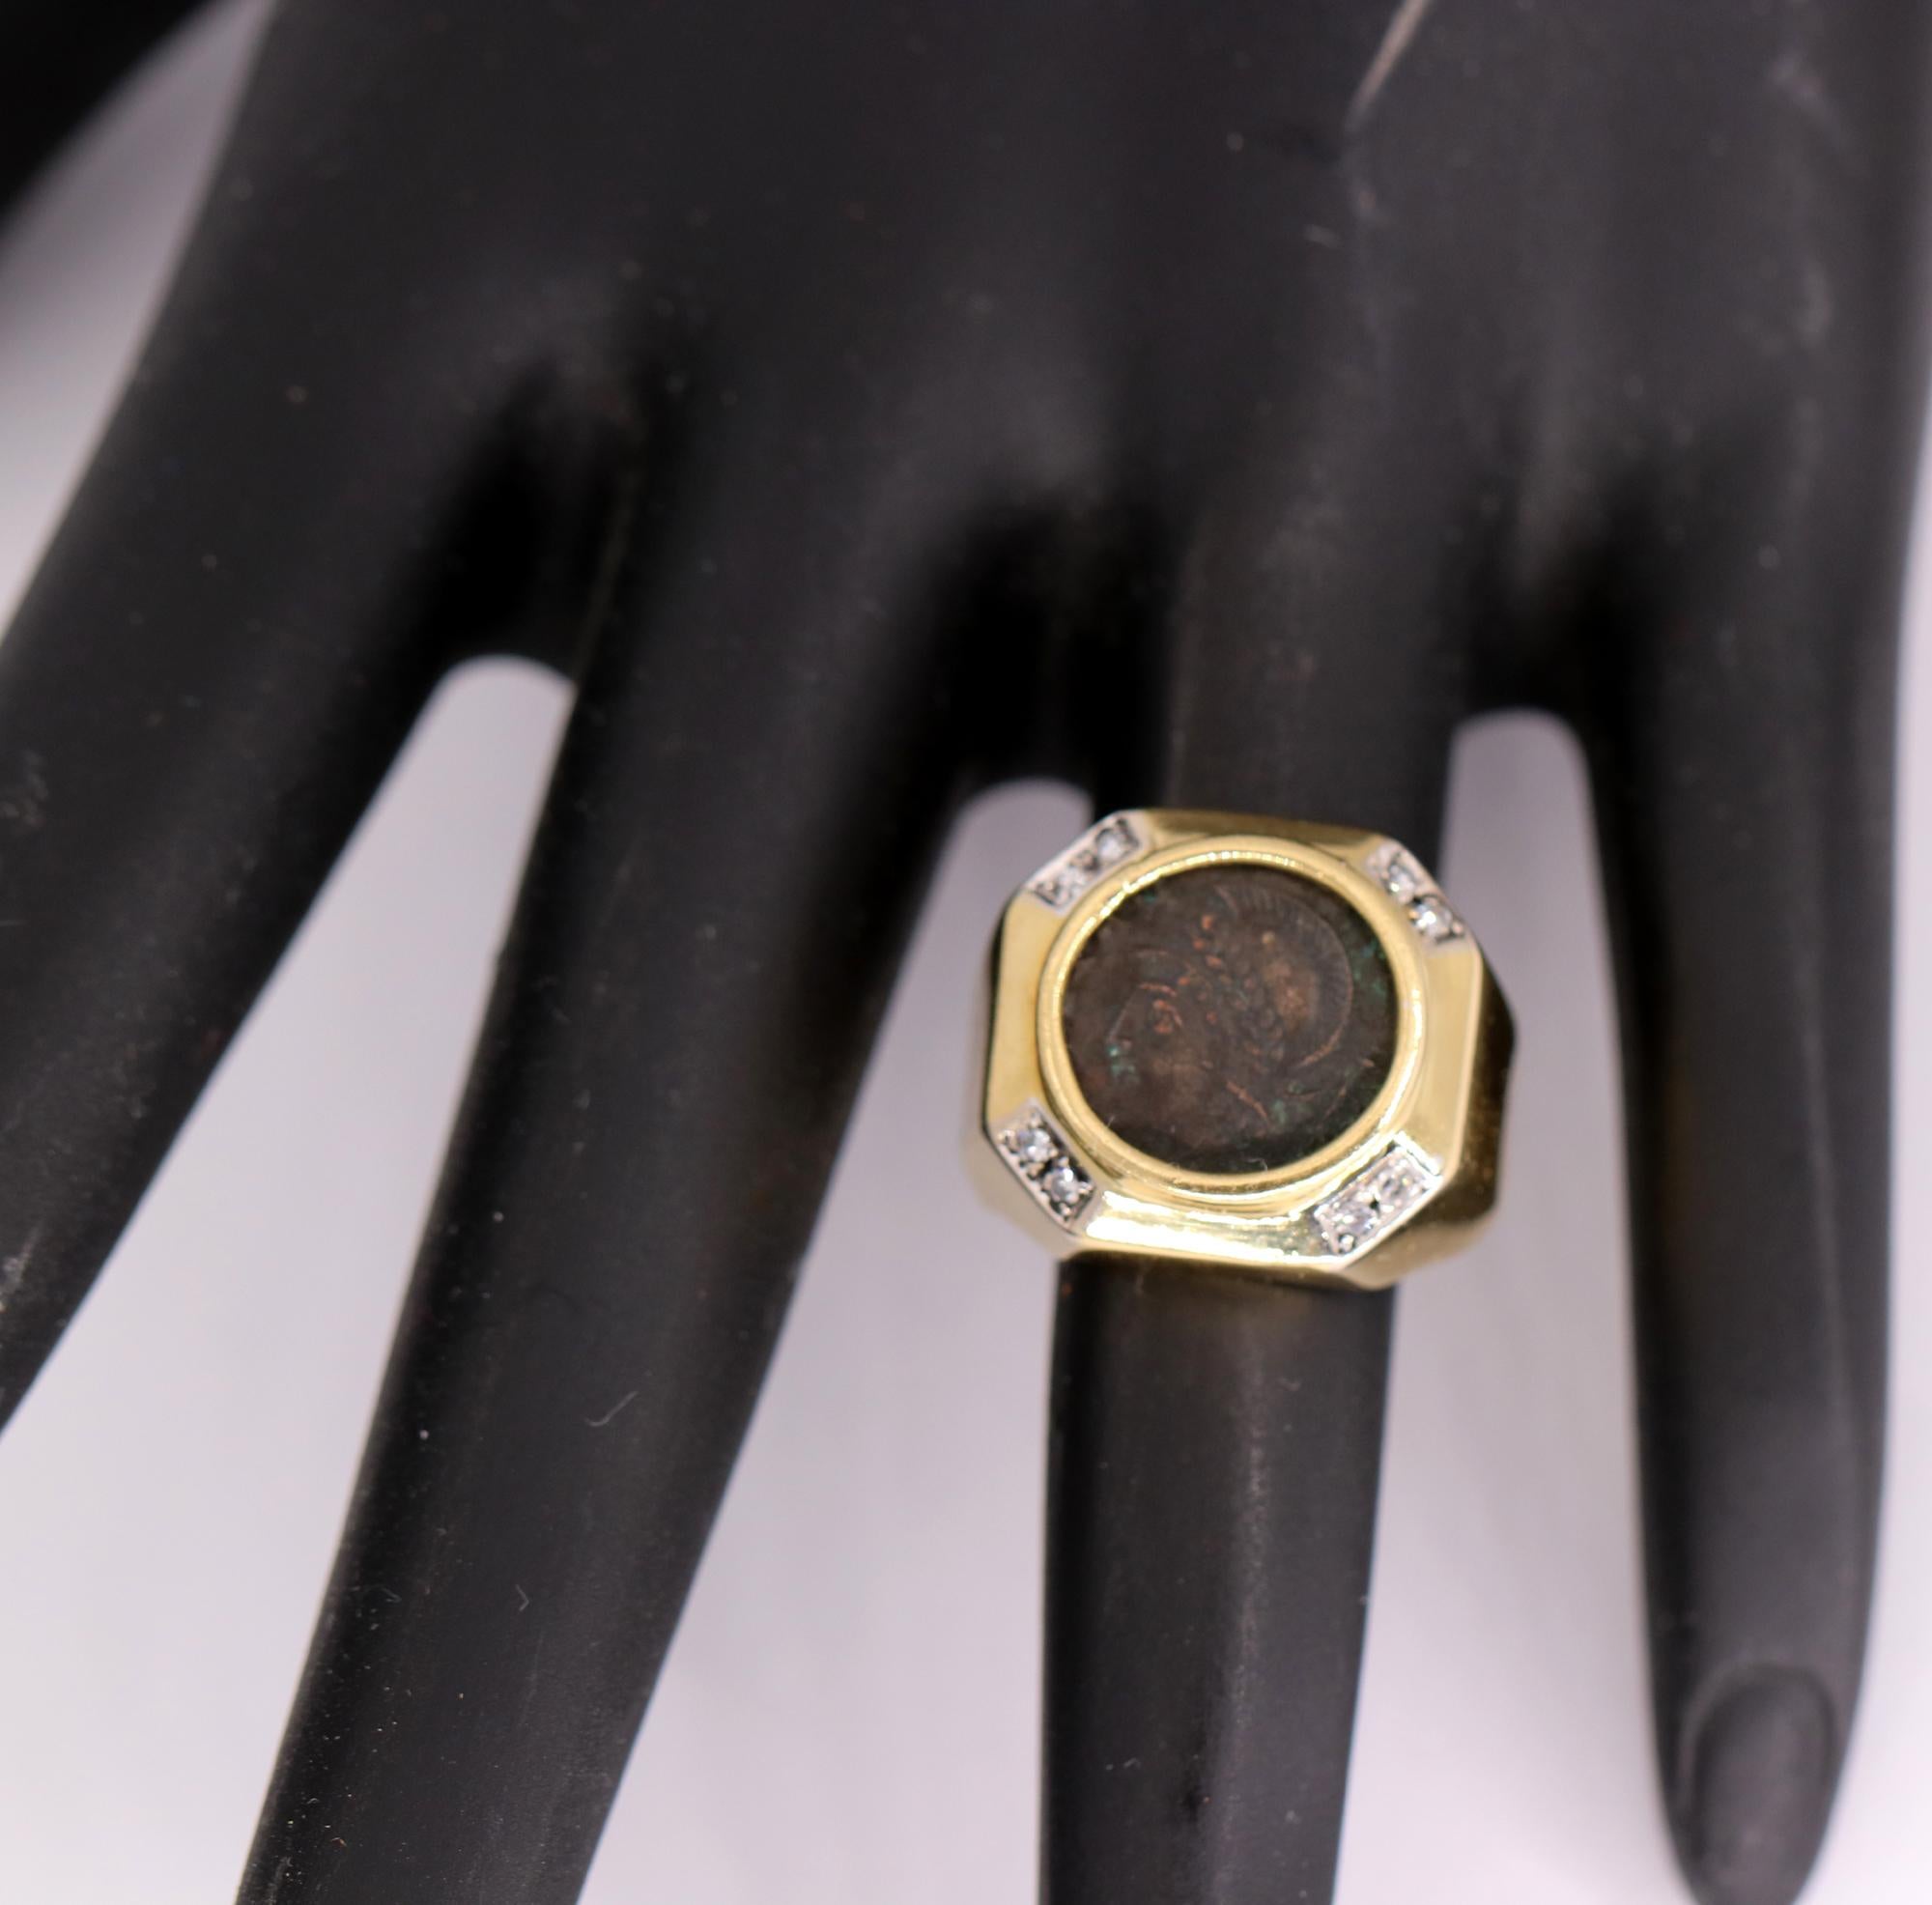 An 18 K yellow gold ring, with an octagonal outline, centered around an ancient coin. At each of the four corners, are set 2 single cut diamonds, adding a subtle sparkle. The ring is a diminutive size 4, making it an excellent pinky ring, and can be